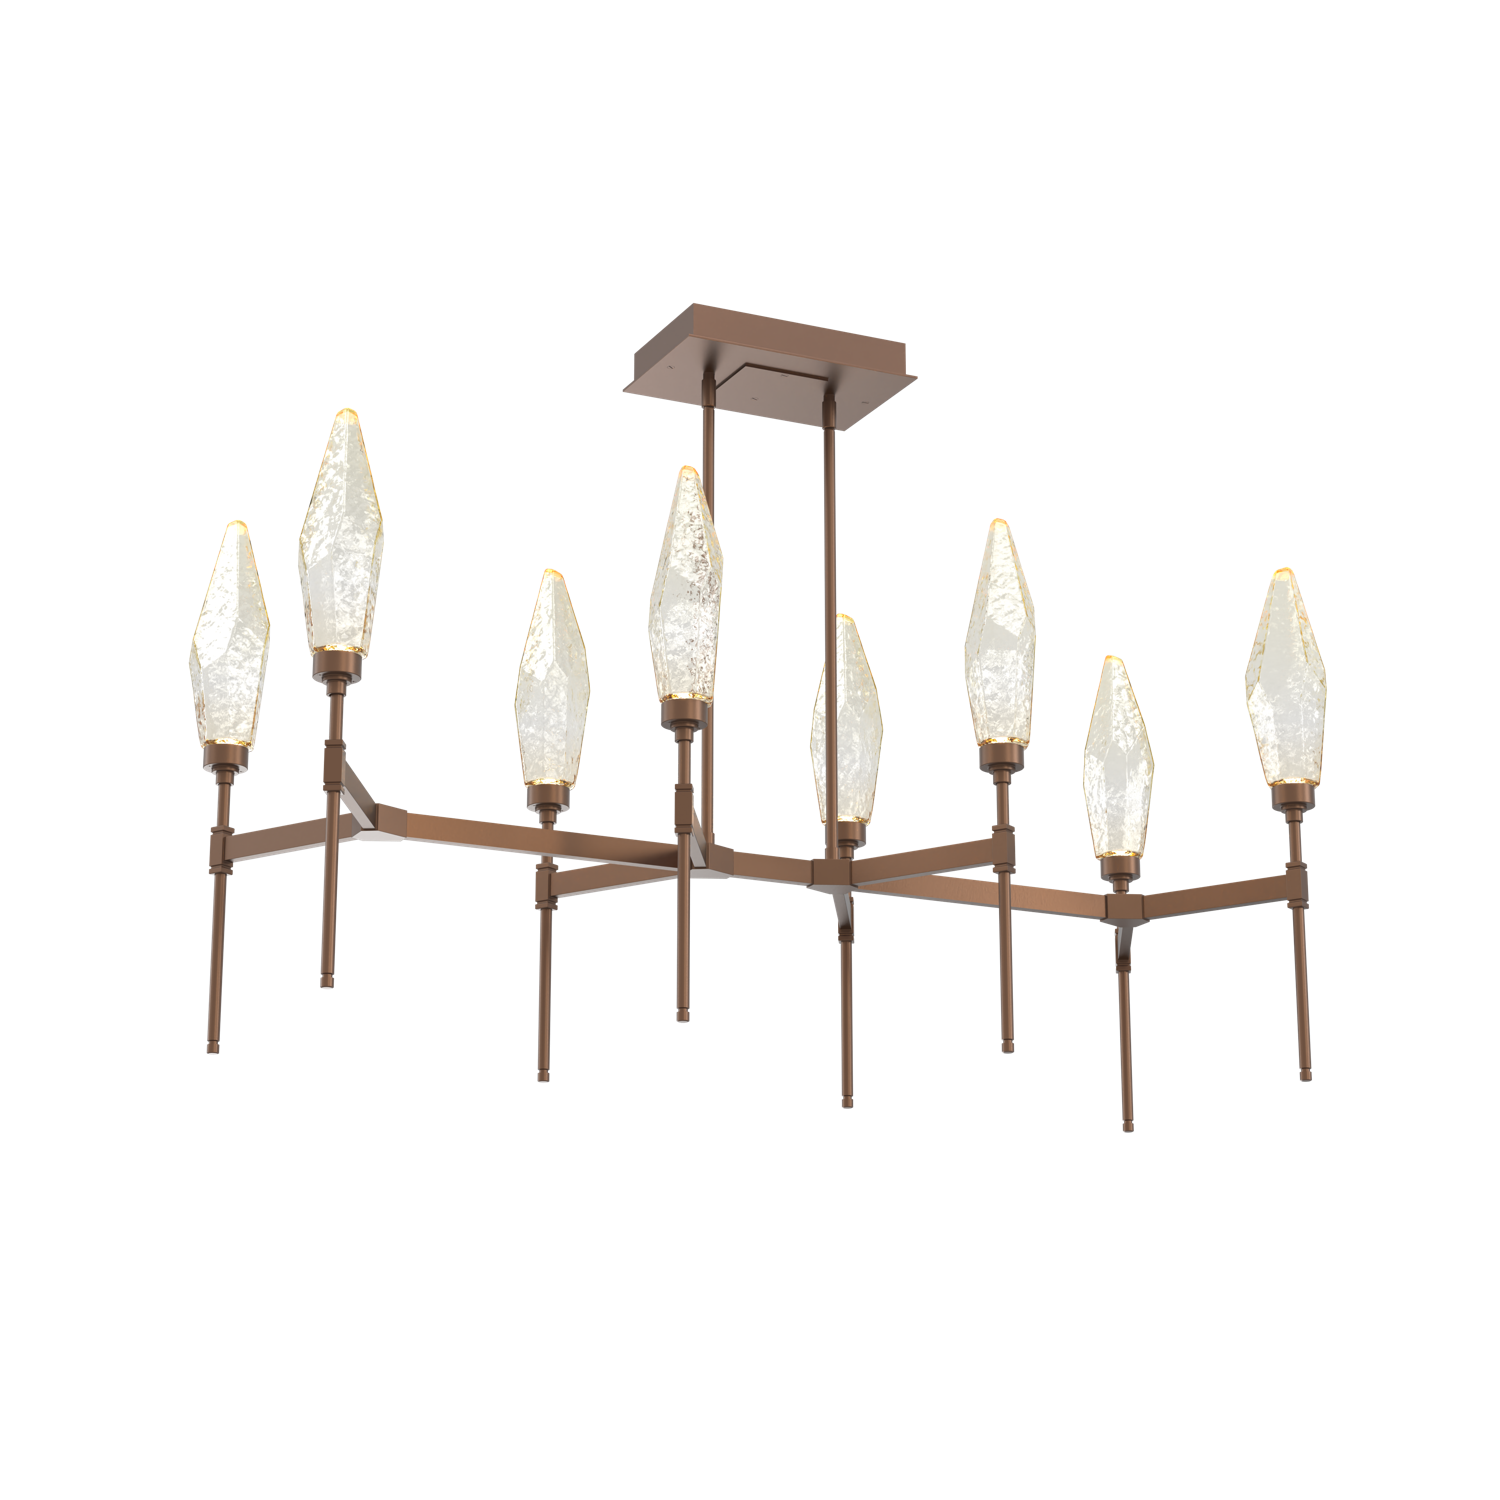 PLB0050-48-BB-CA-Hammerton-Studio-Rock-Crystal-48-inch-linear-belvedere-chandelier-with-burnished-bronze-finish-and-chilled-amber-blown-glass-shades-and-LED-lamping